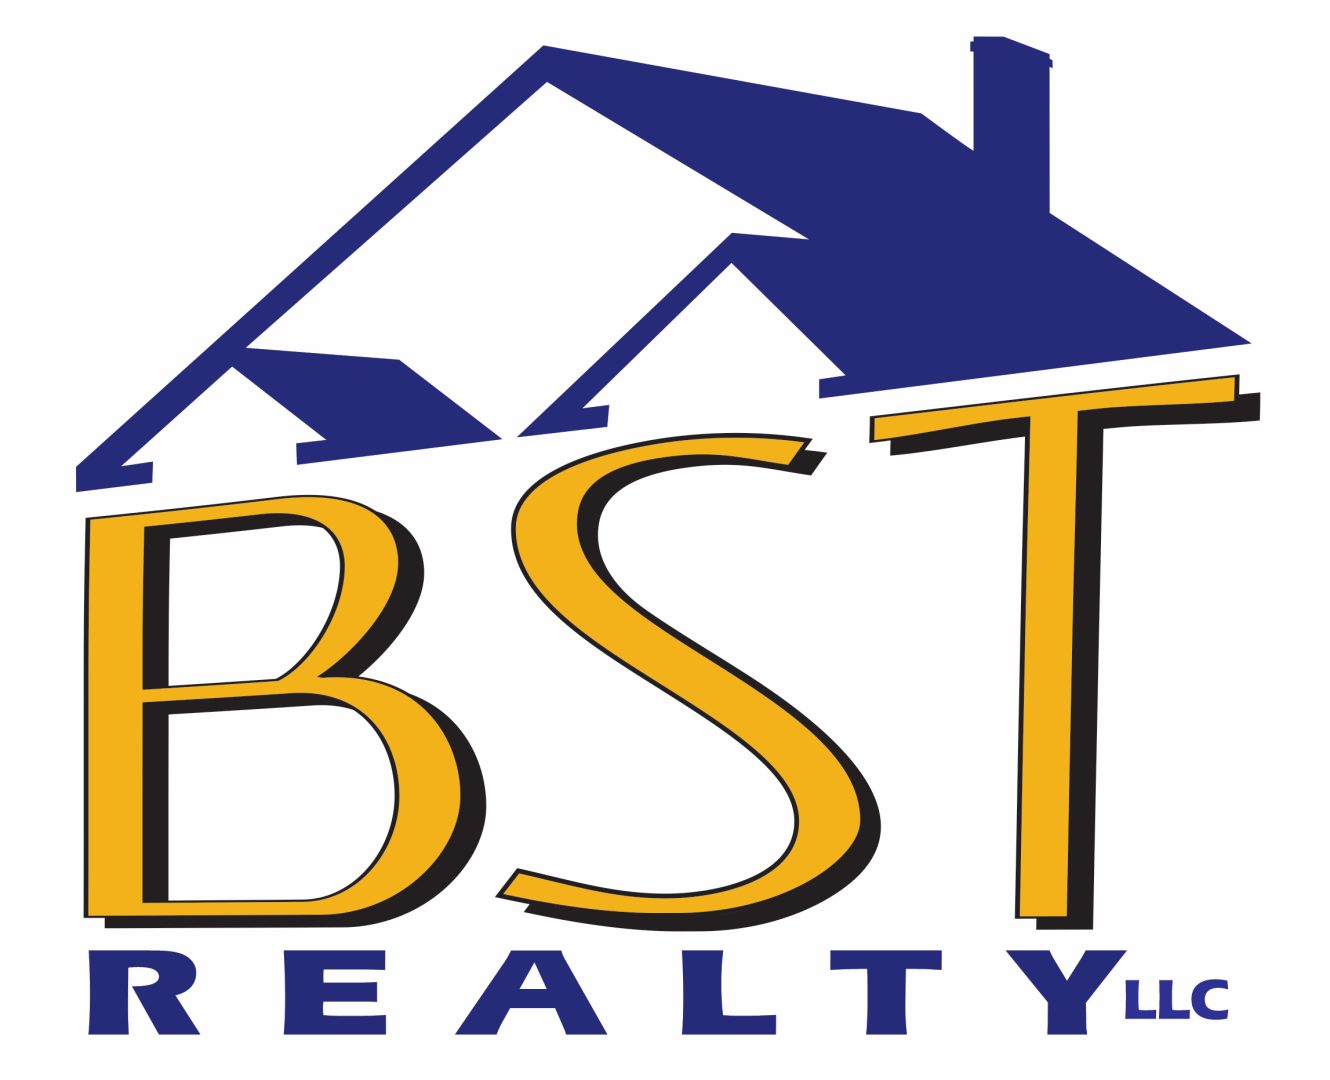 BST Realty LLC logo - in navy blue and gold